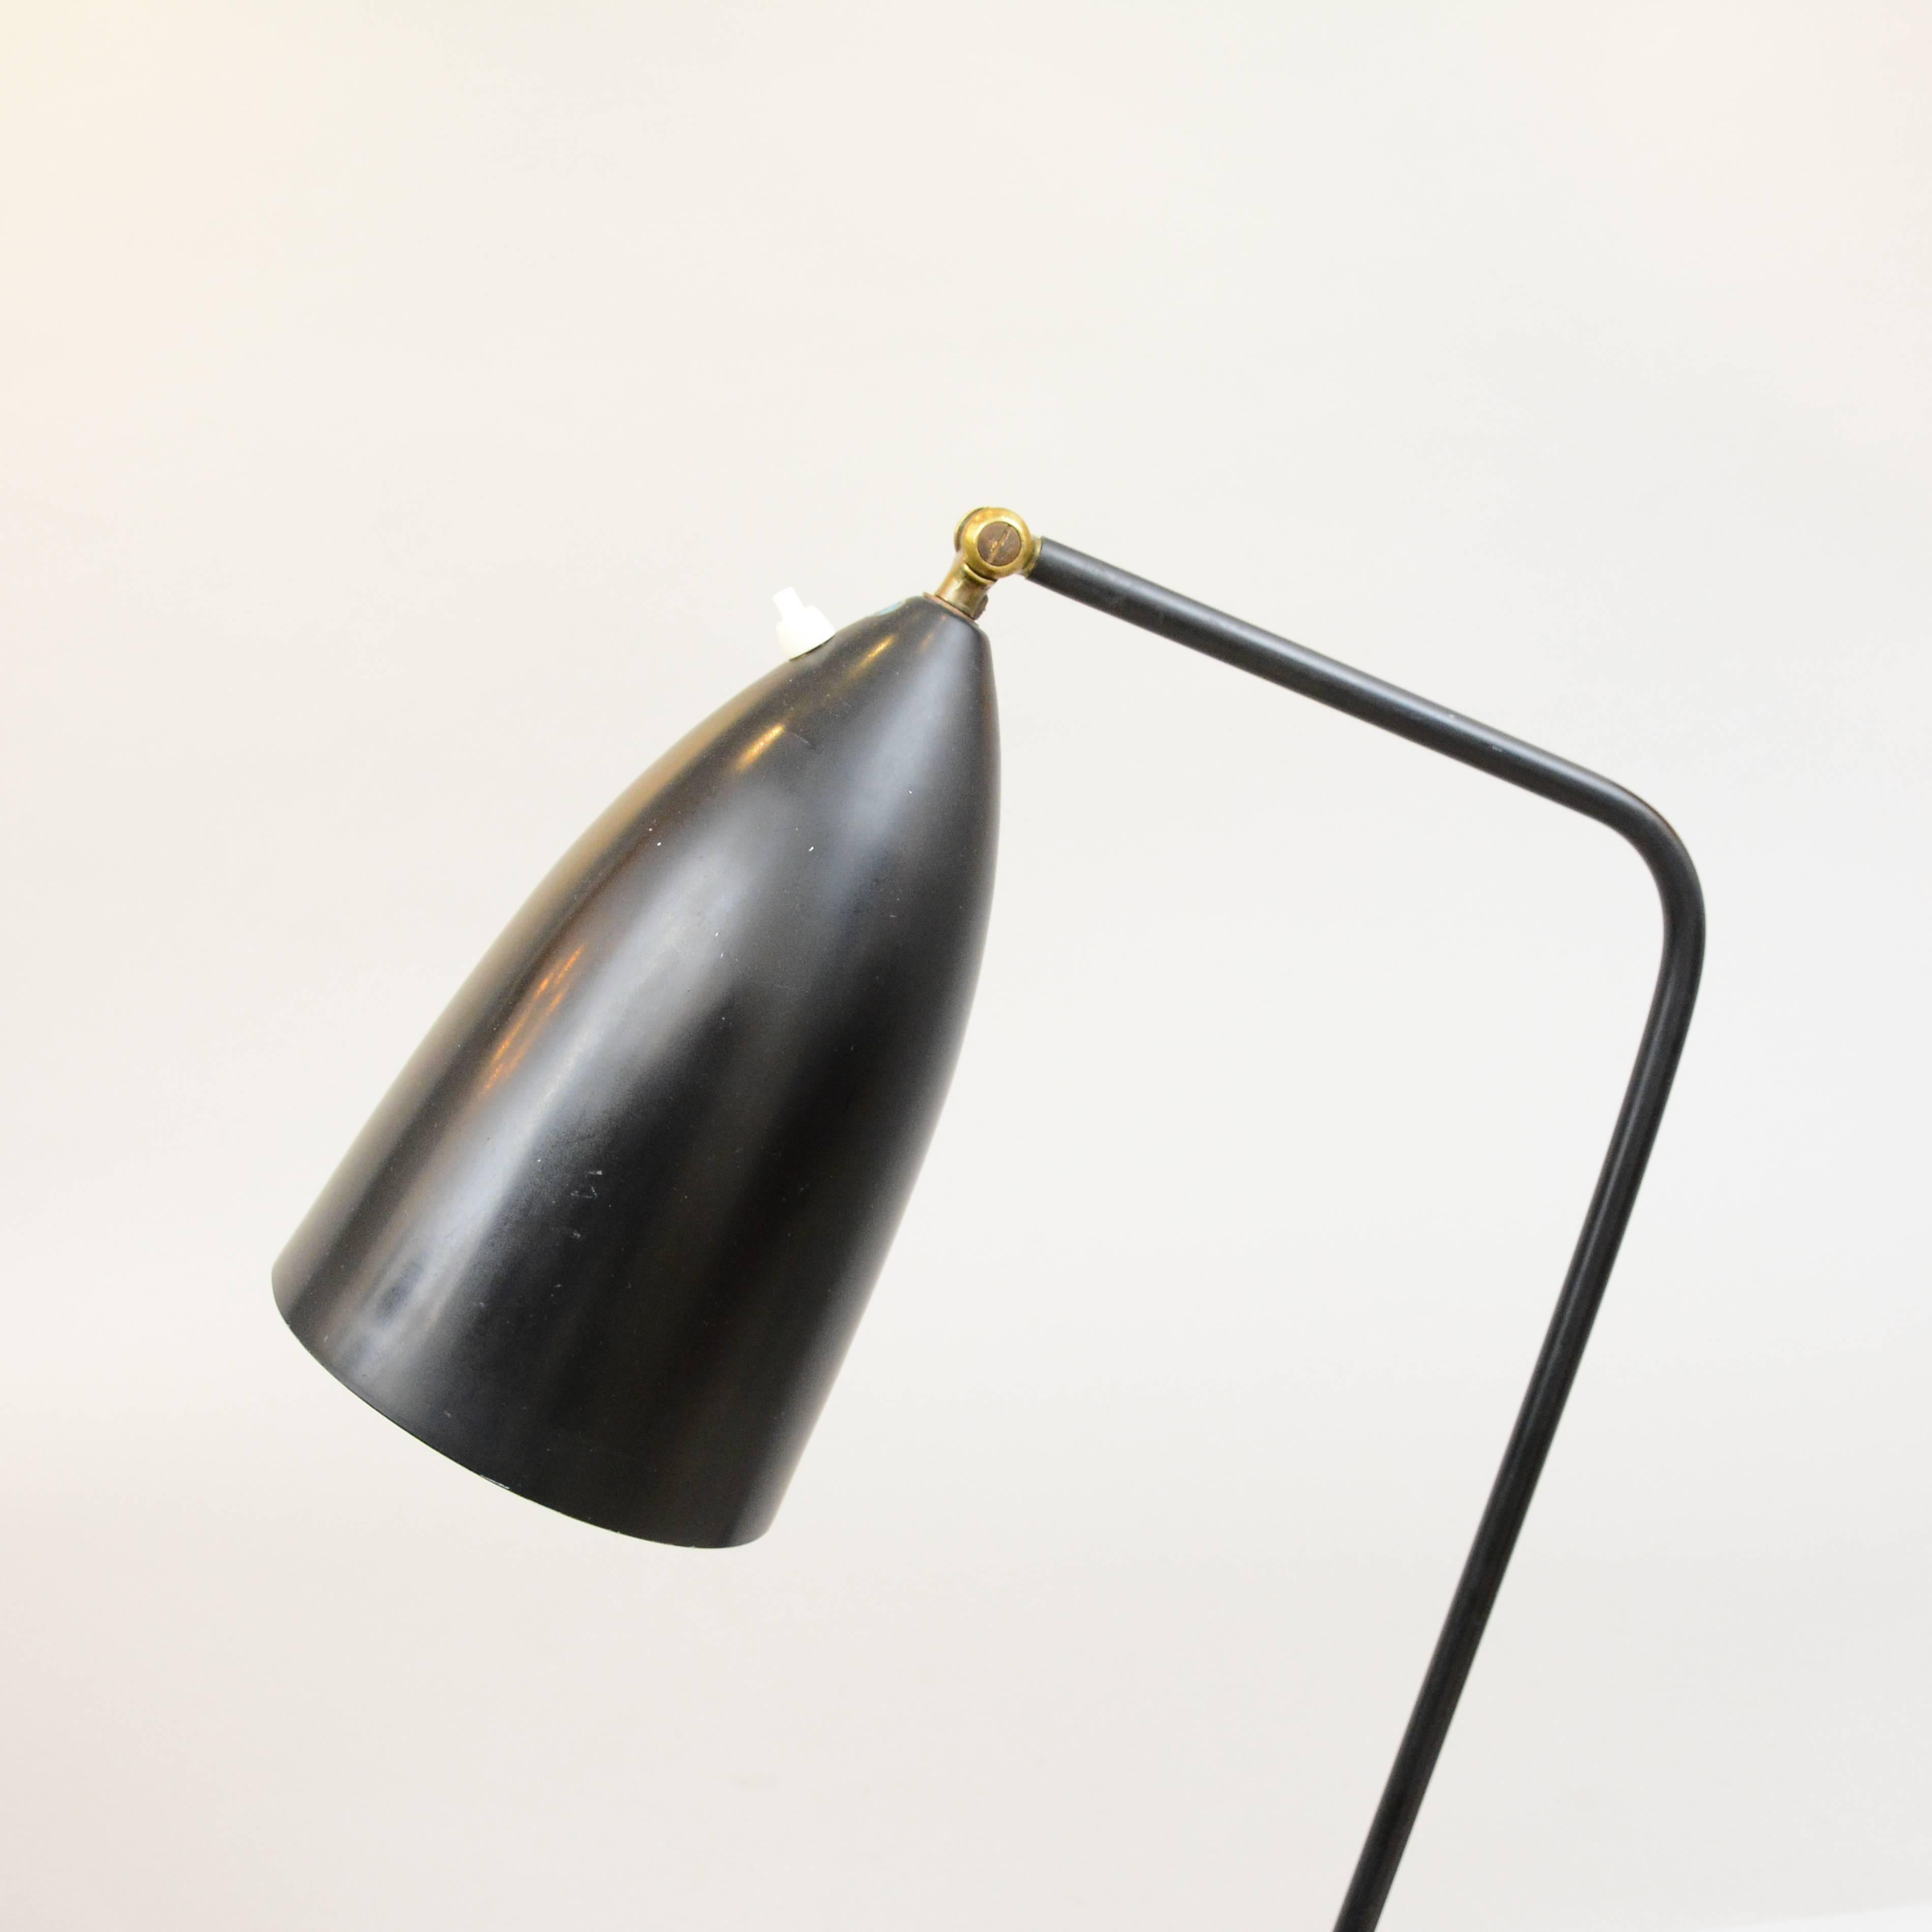 Grasshopper lamp designed by Greta Grossman-Magnusson for Bergboms, Malmo, Sweden. 1940s. Black painted metal and brass details. Swedish gold or blue sticker for approved electronics.